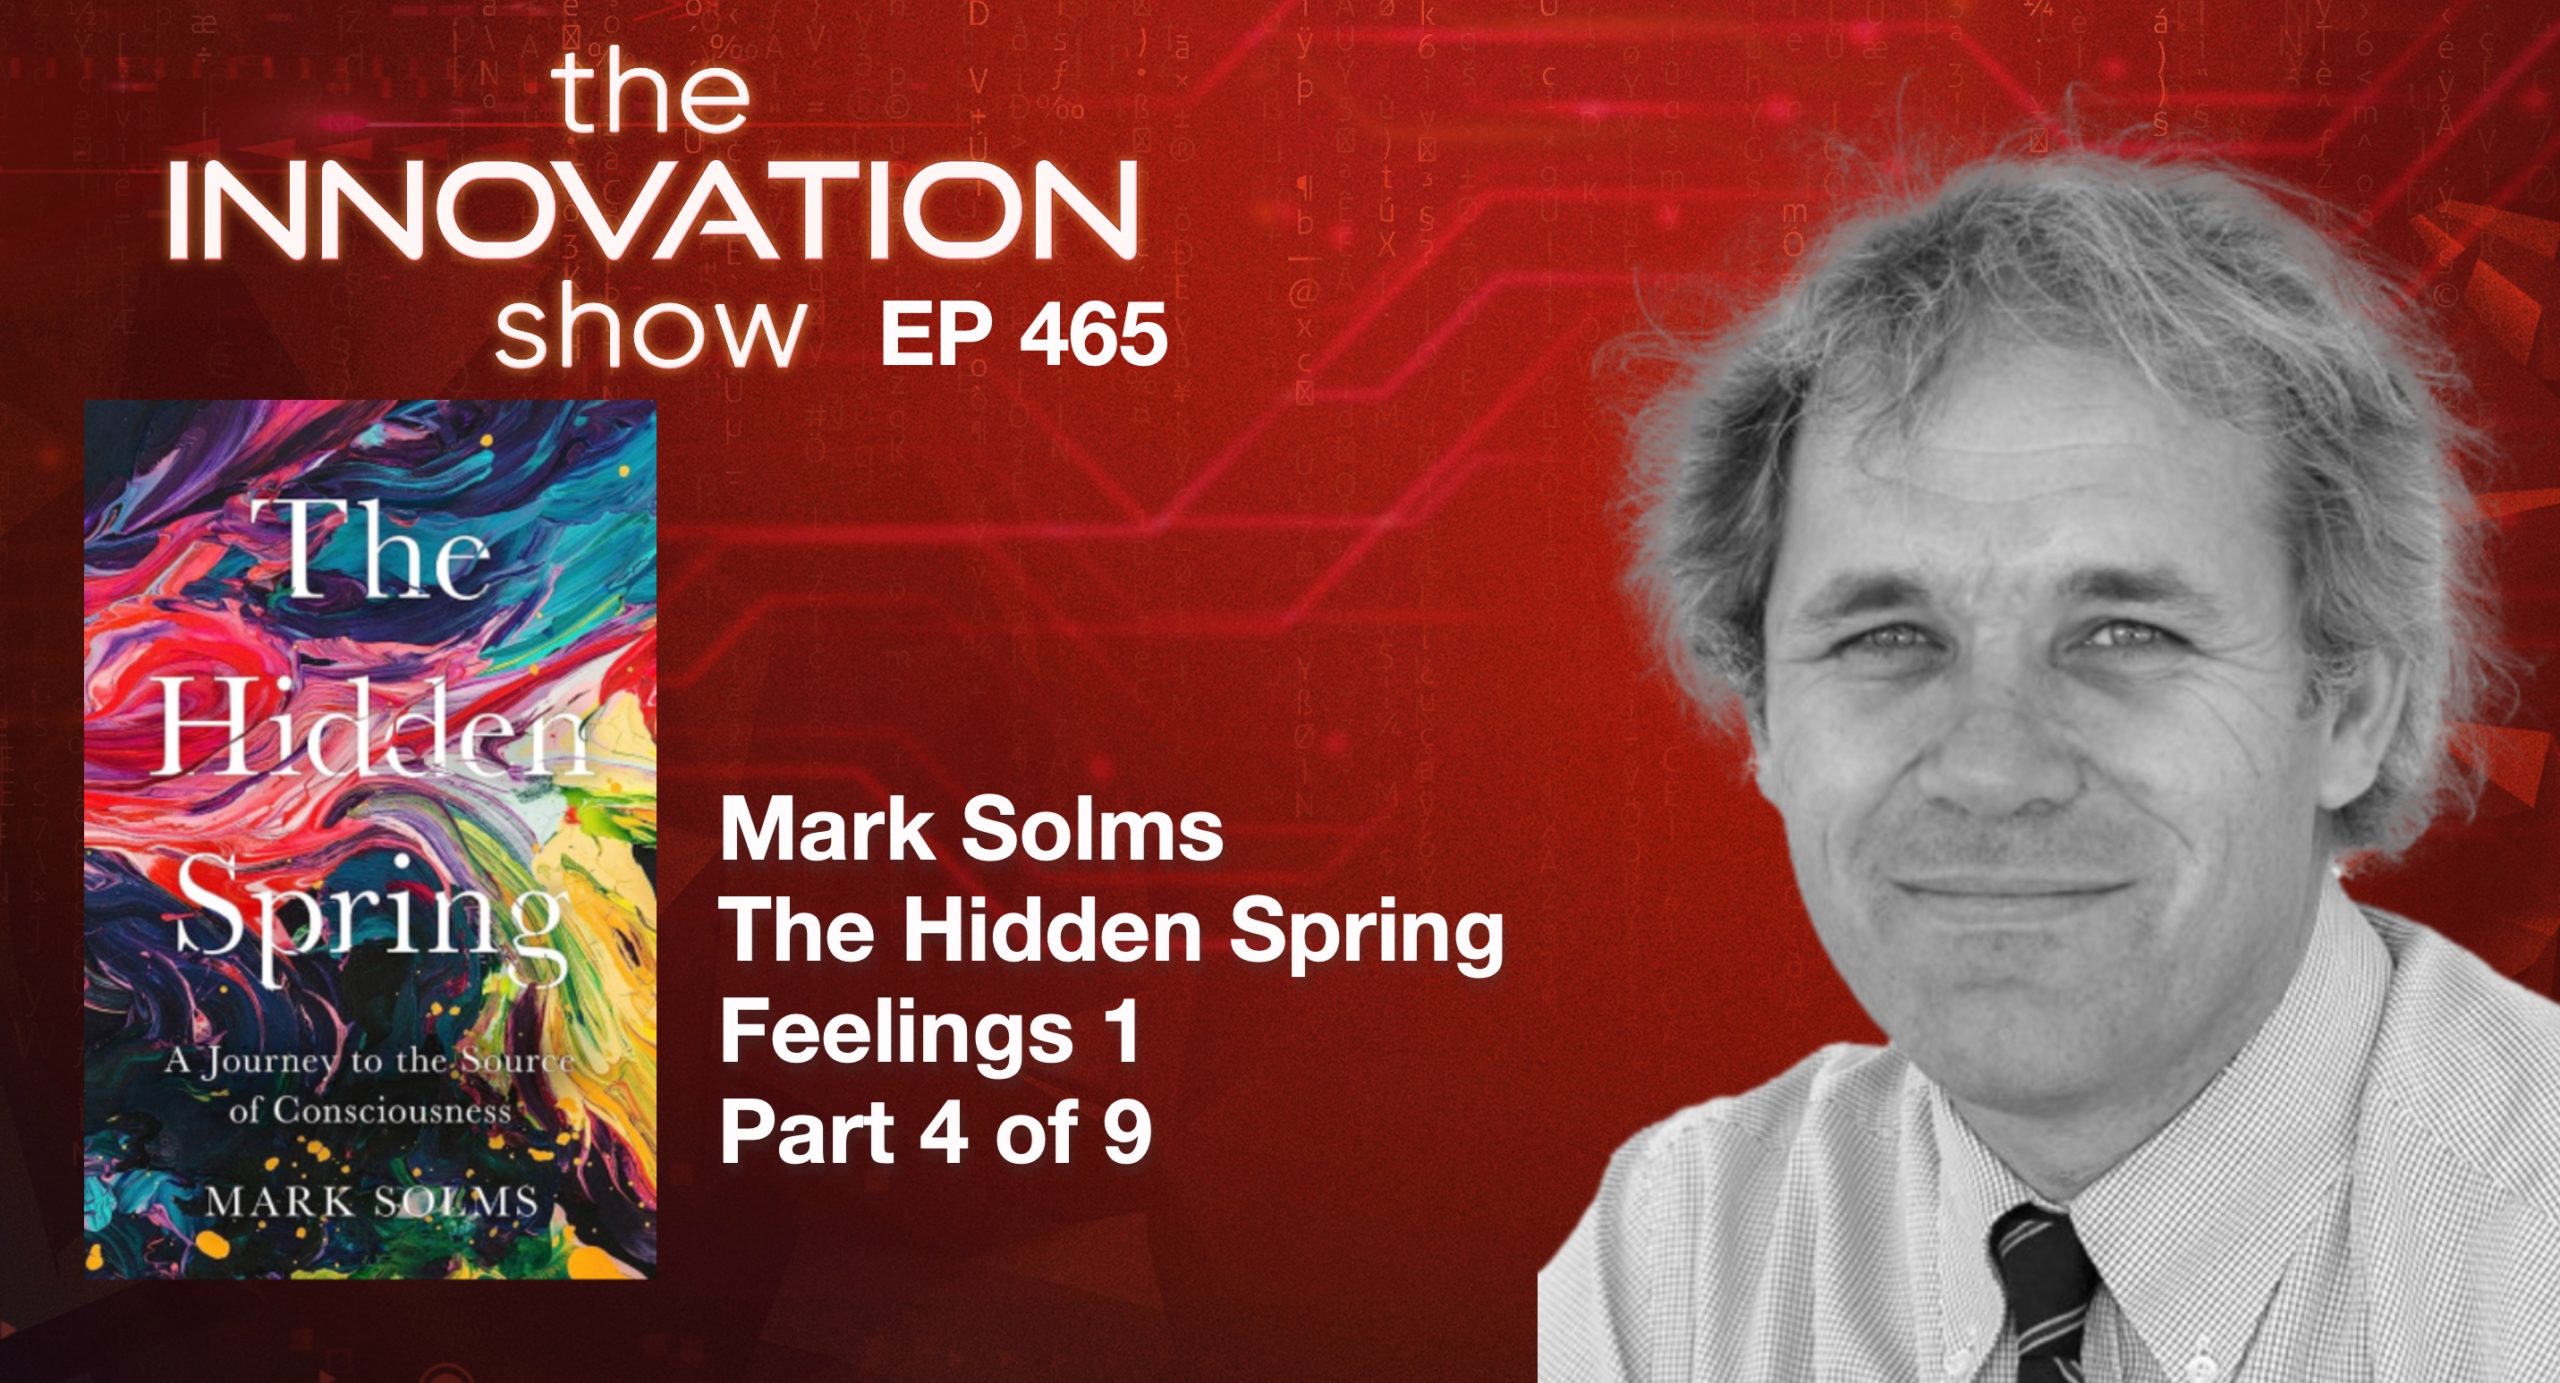 Mark Solms